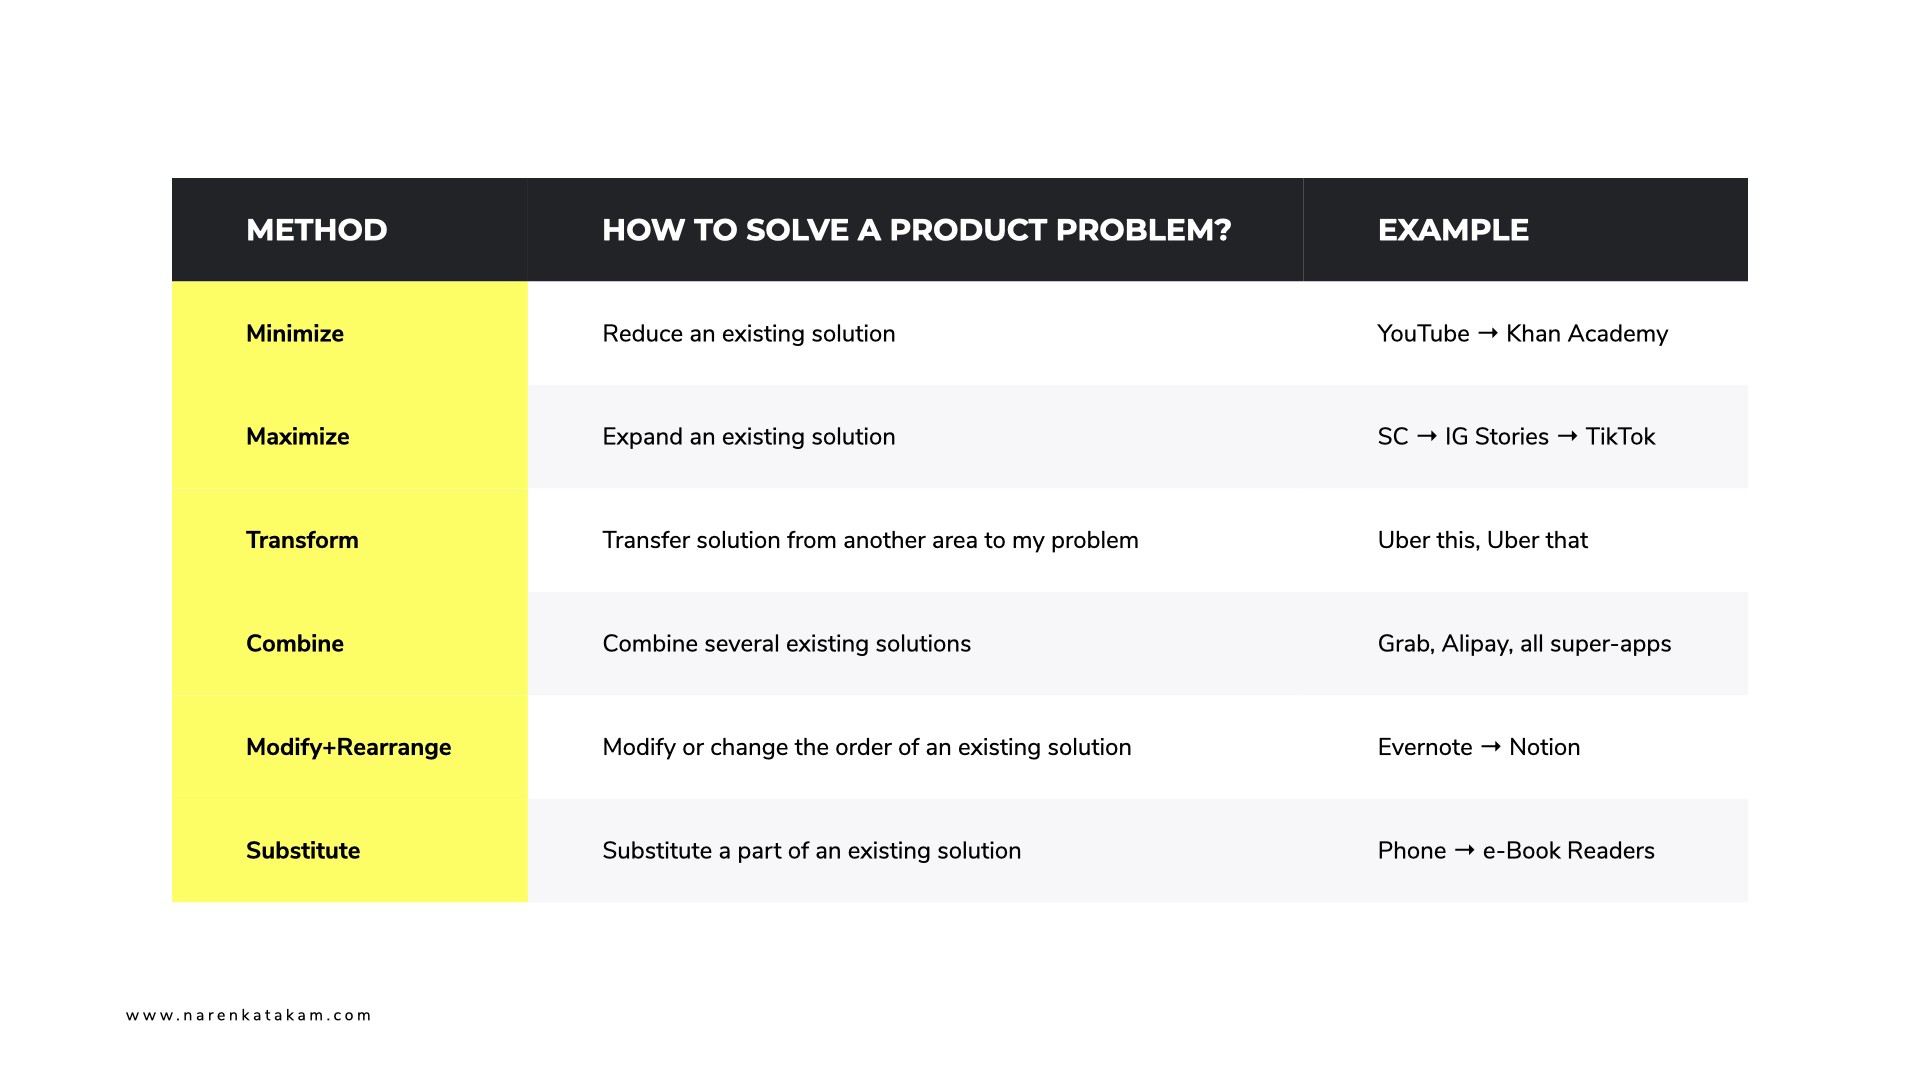 Product Thinking 101: What, why and how?